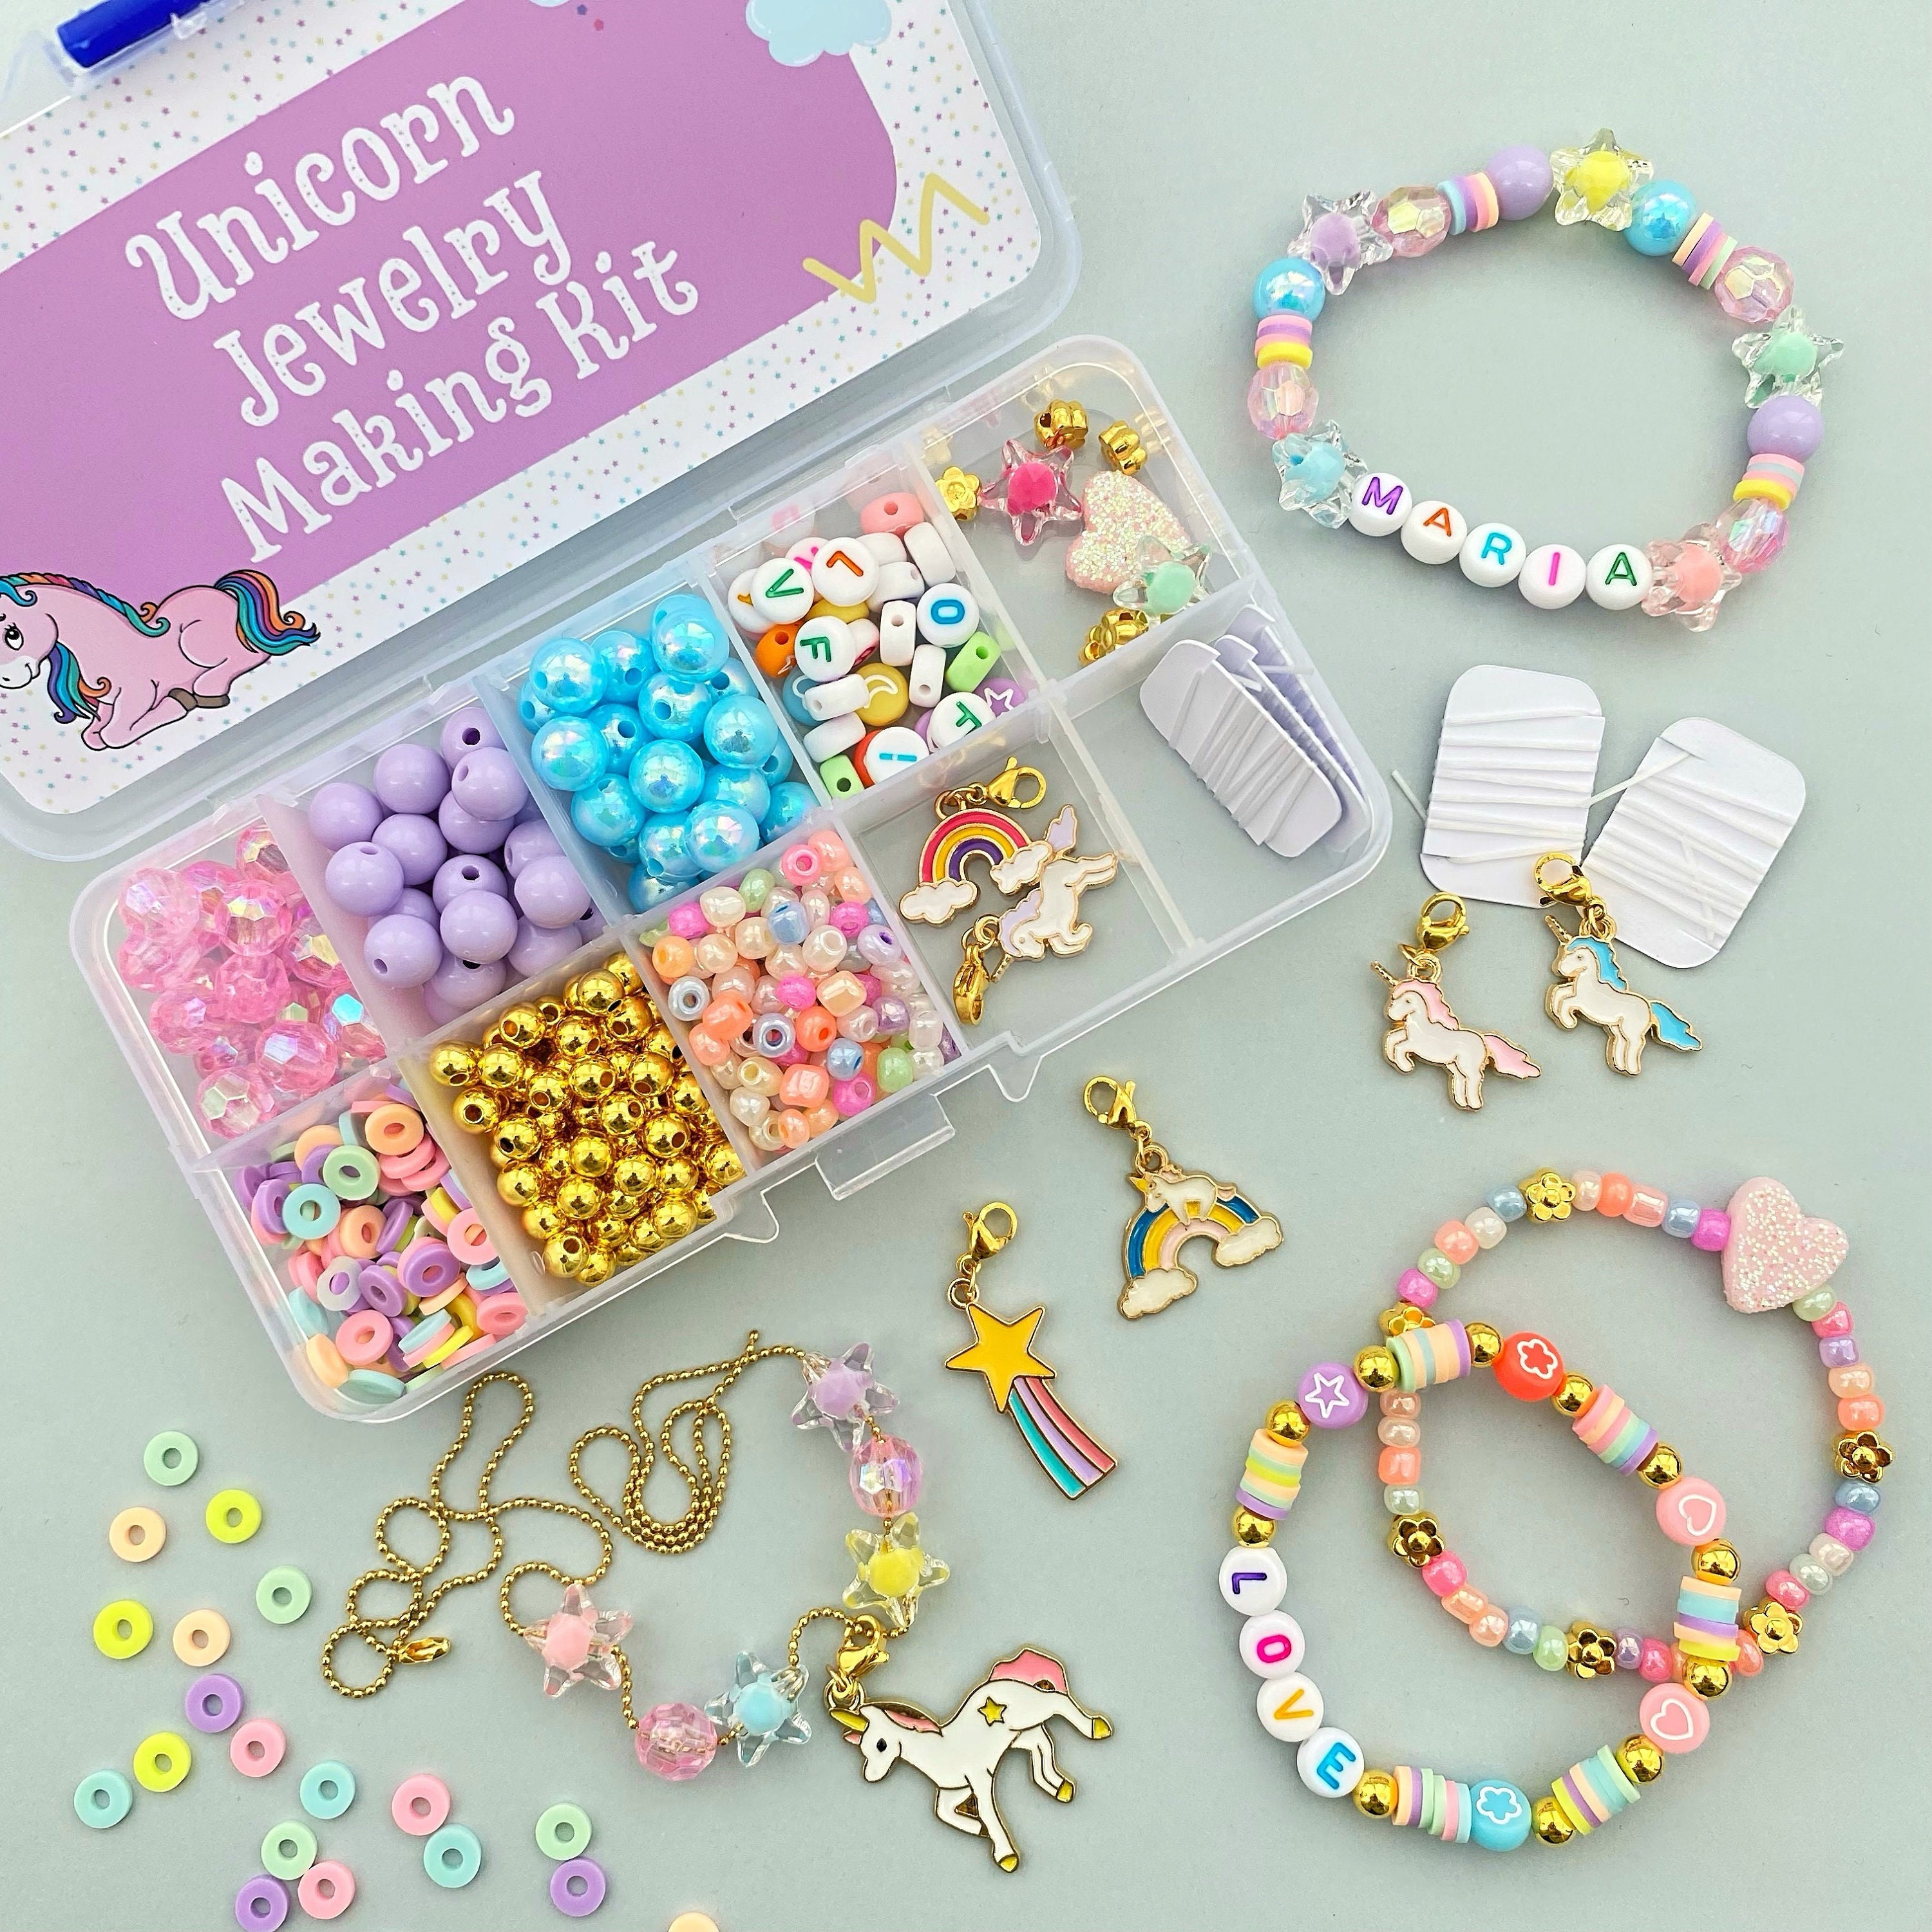 Craft Kits, Space Bead Craft, DIY Kit, DIY Crafts, Gifts for Kids, Craft  Kits for Kids, Pony Bead Sets, Kids Toys 